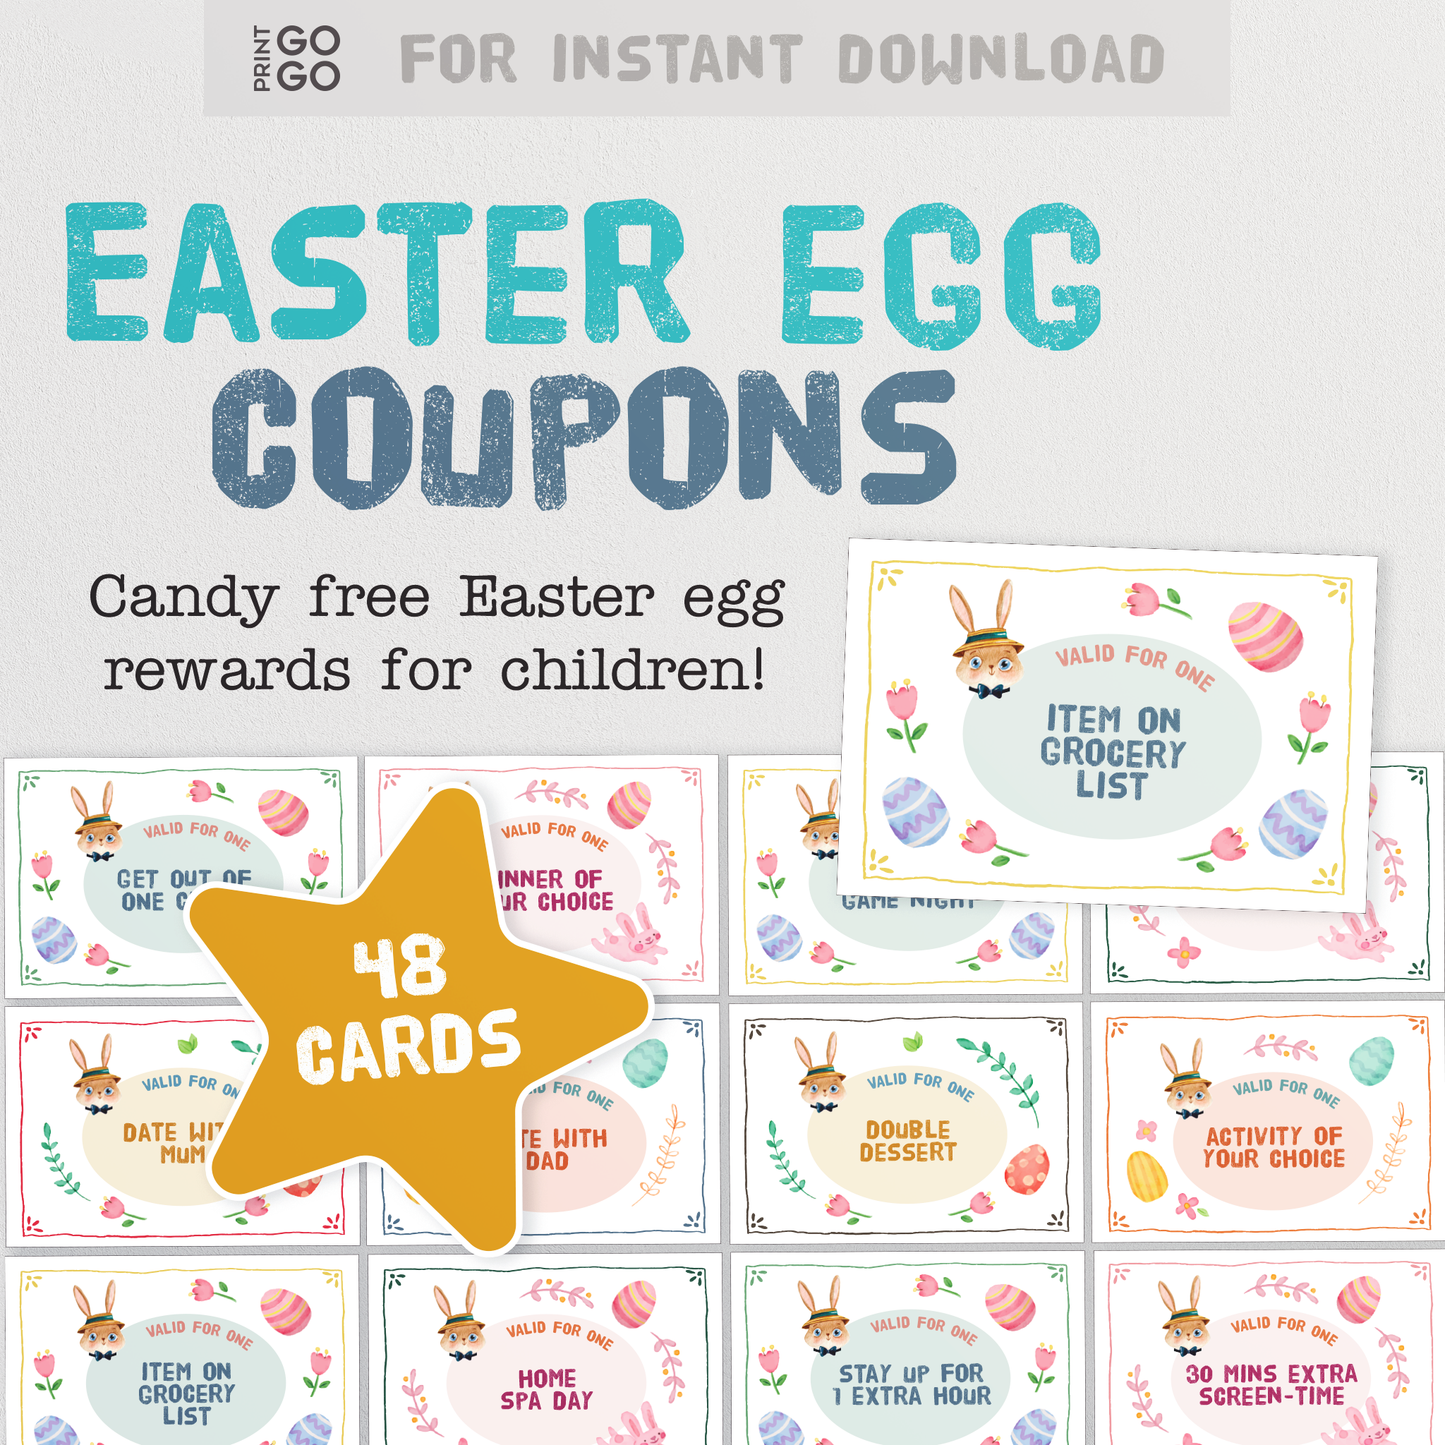 48 Easter Coupons for Kids - The Candy Free Healthy Alternative!